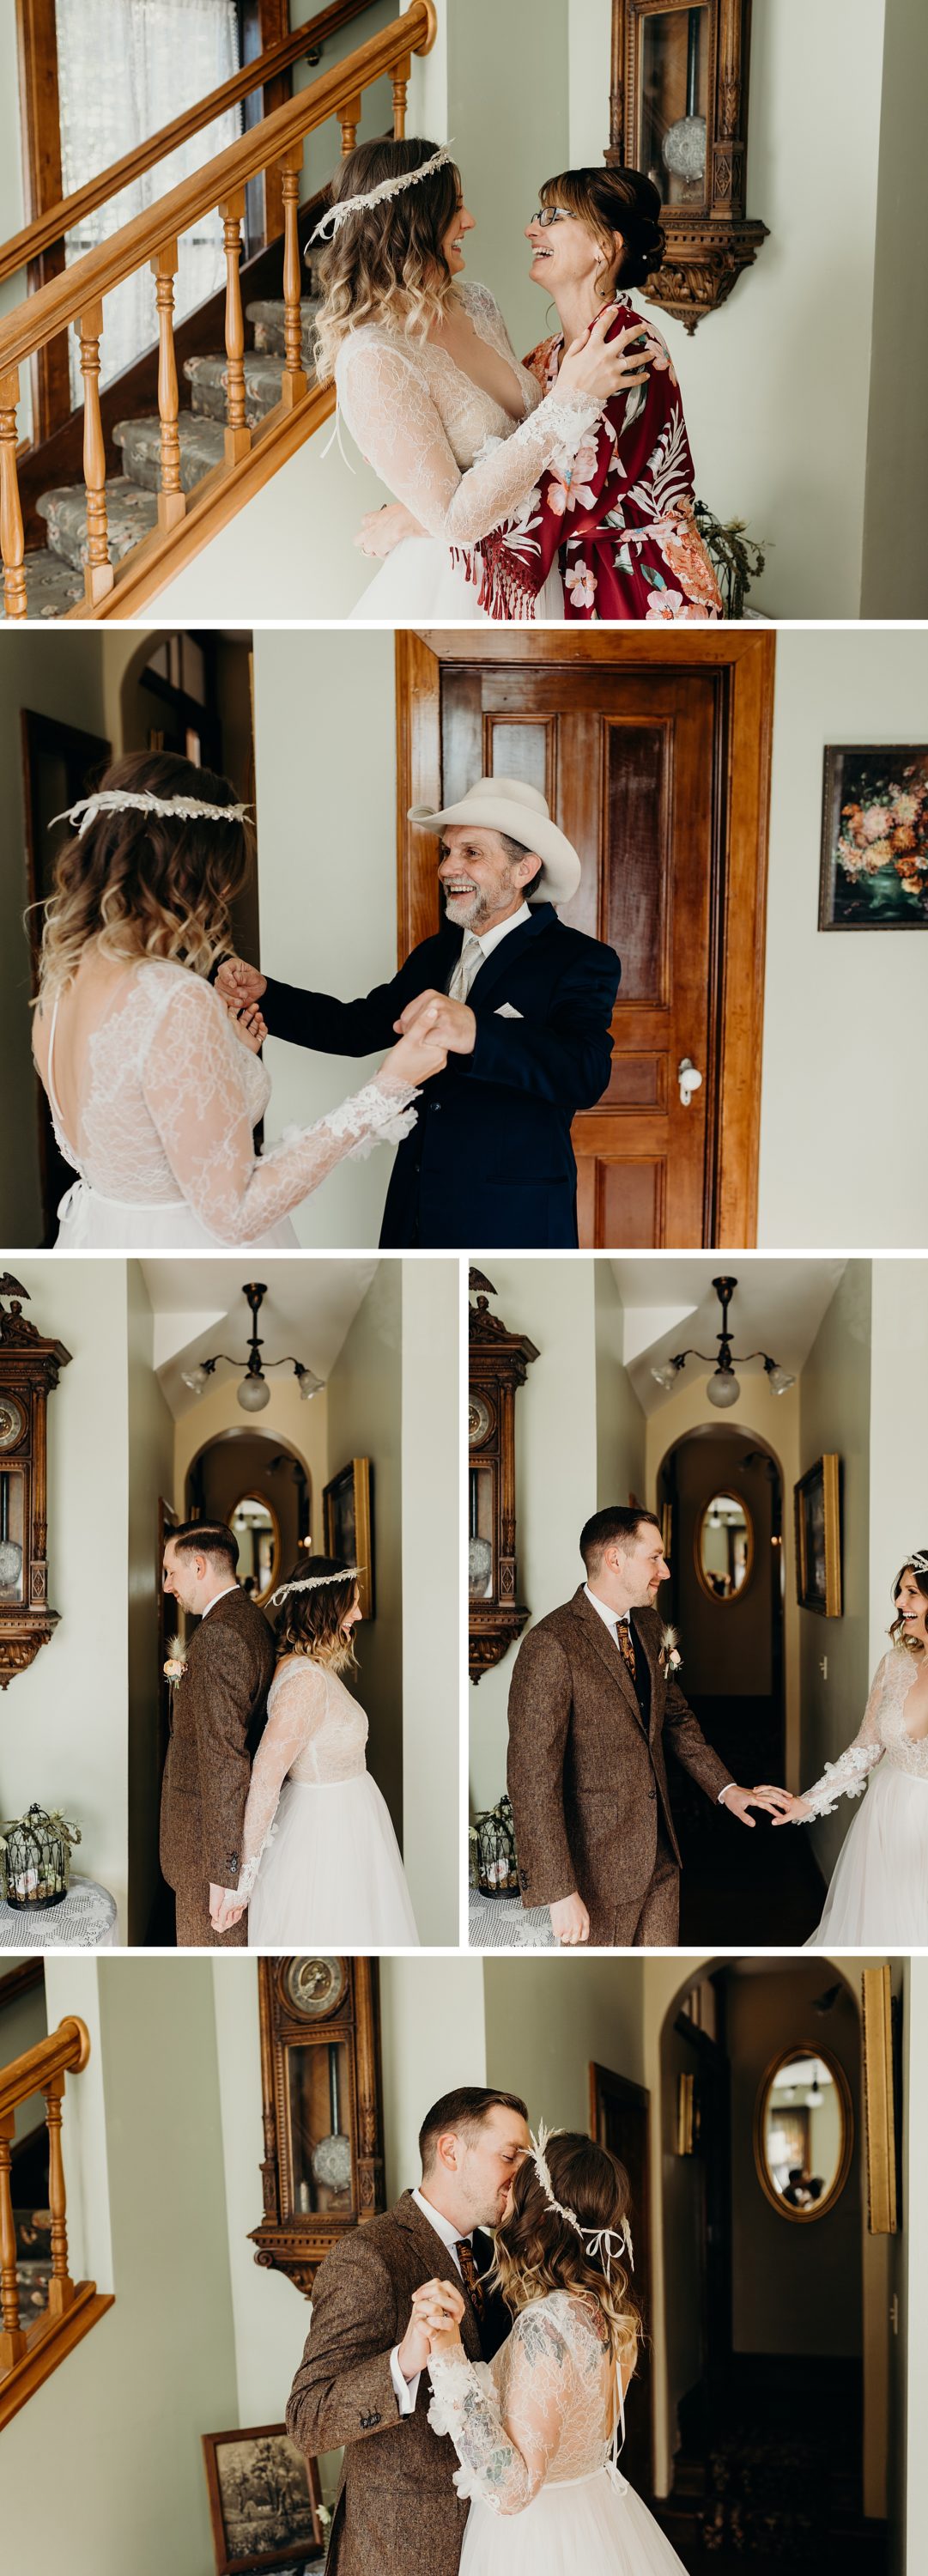 First looks with the bride's parents and the groom. Photographed by Portland Wedding Photographer, Briana Morrison